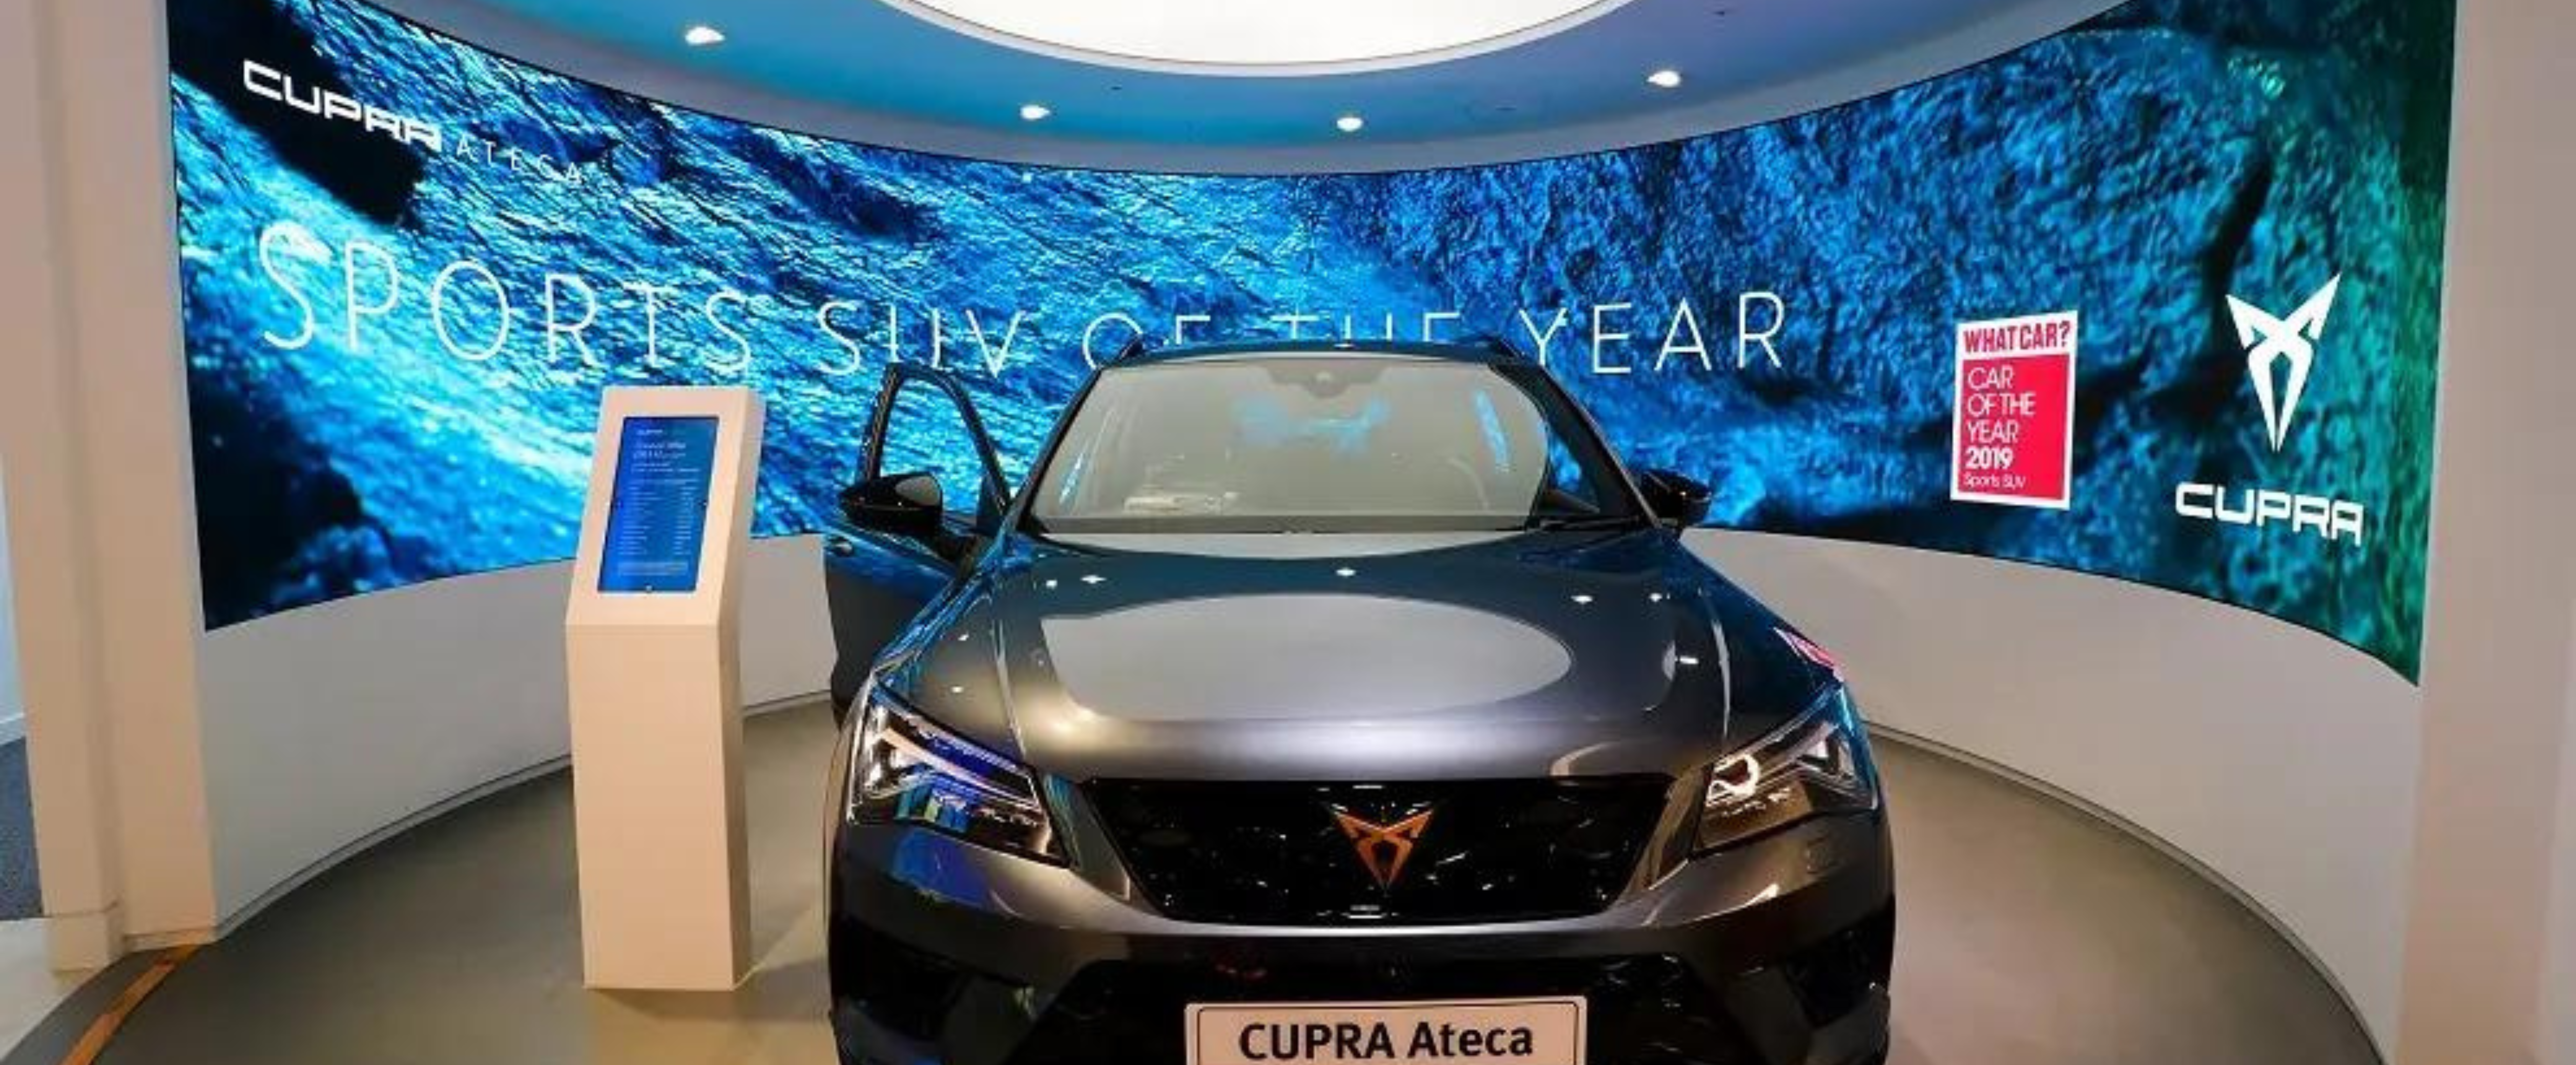 LED Curved Display in Car Showroom